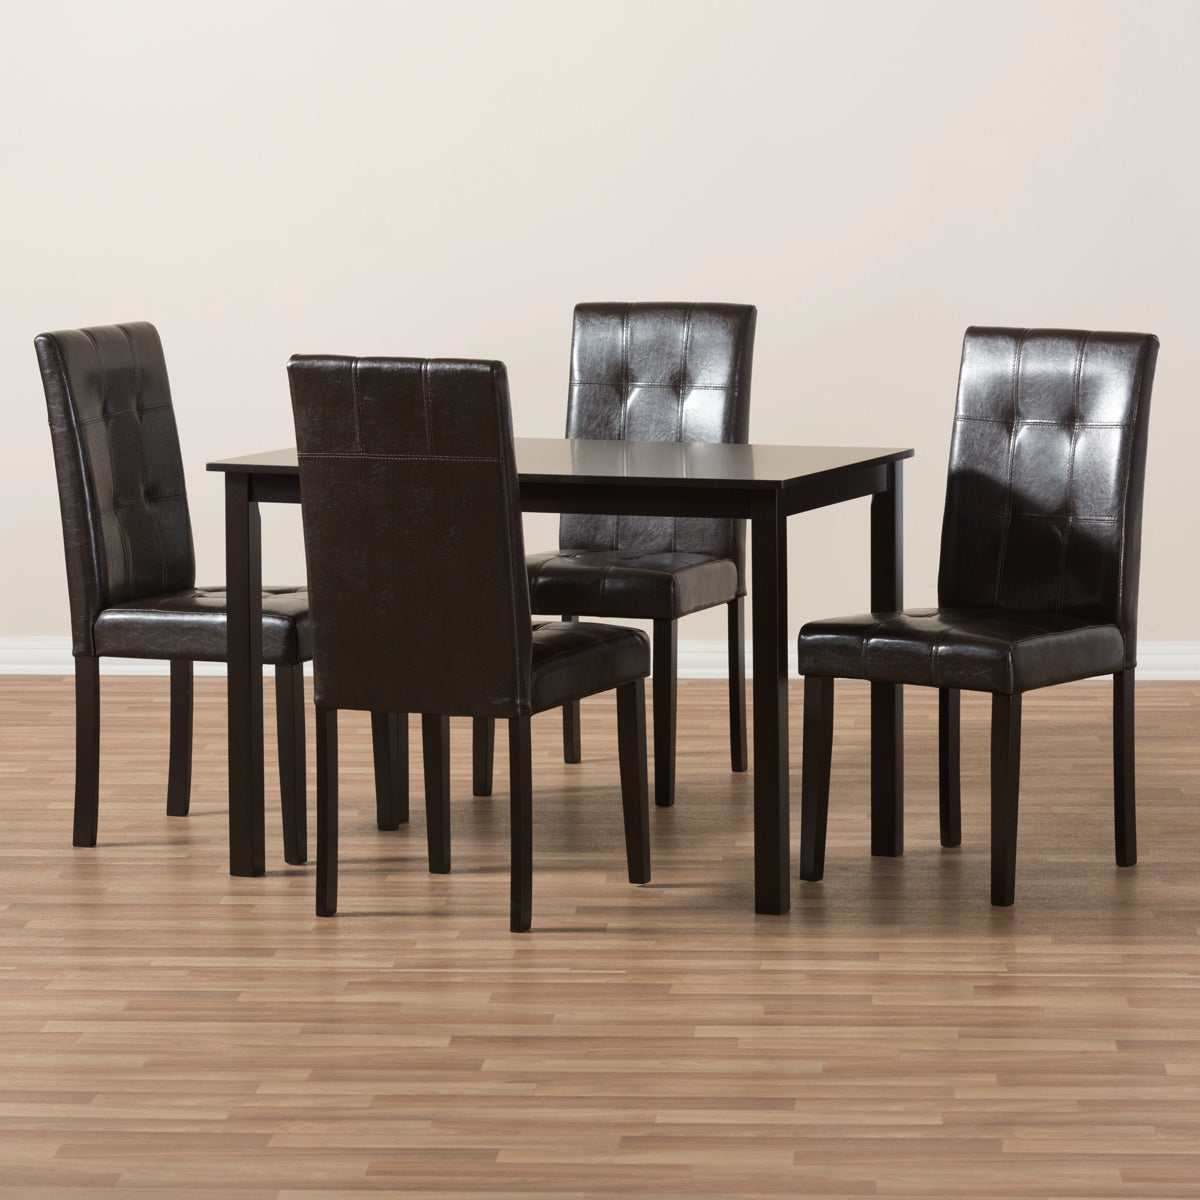 Baxton Studio Avery Modern and Contemporary Dark Brown Faux Leather Upholstered 5-Piece Dining Set Baxton Studio-0-Minimal And Modern - 6